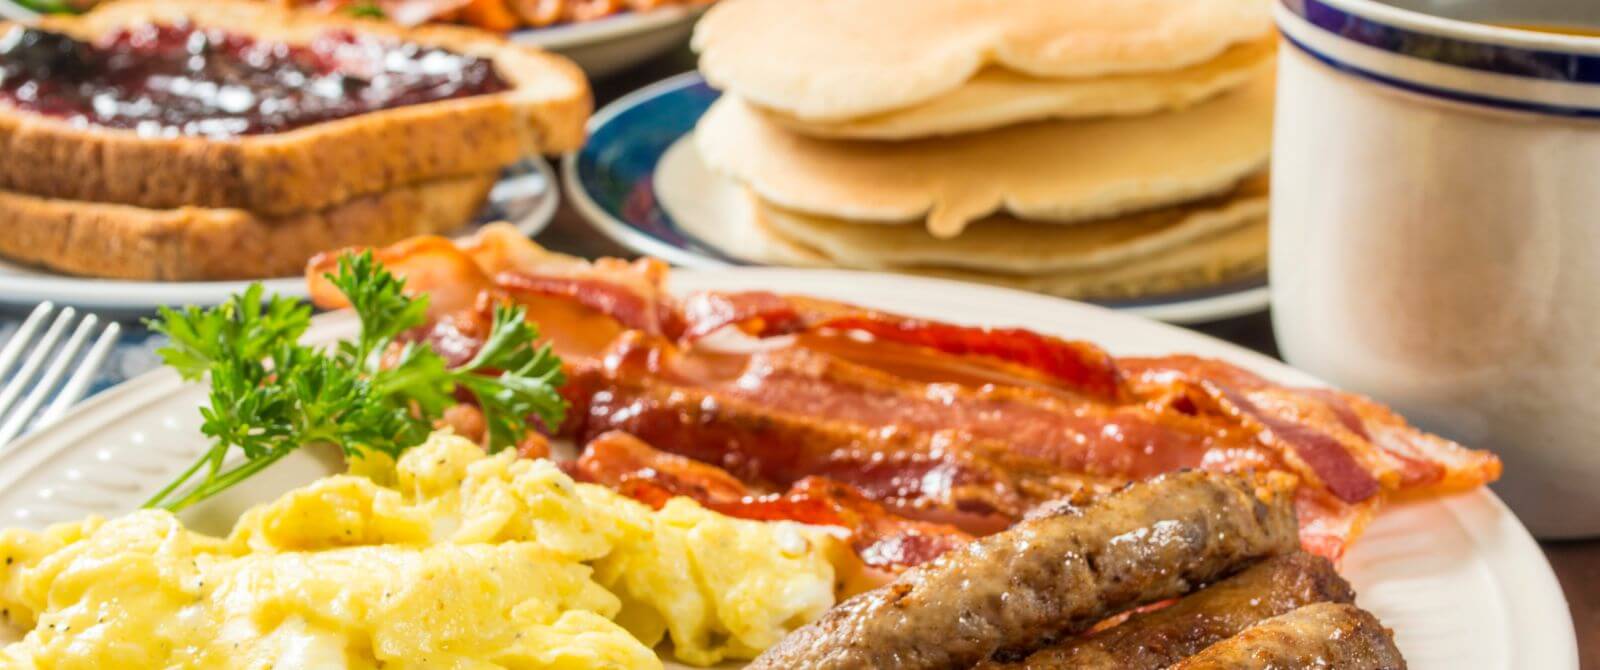 breakfast foods with eggs, bacon, pancakes and french toast